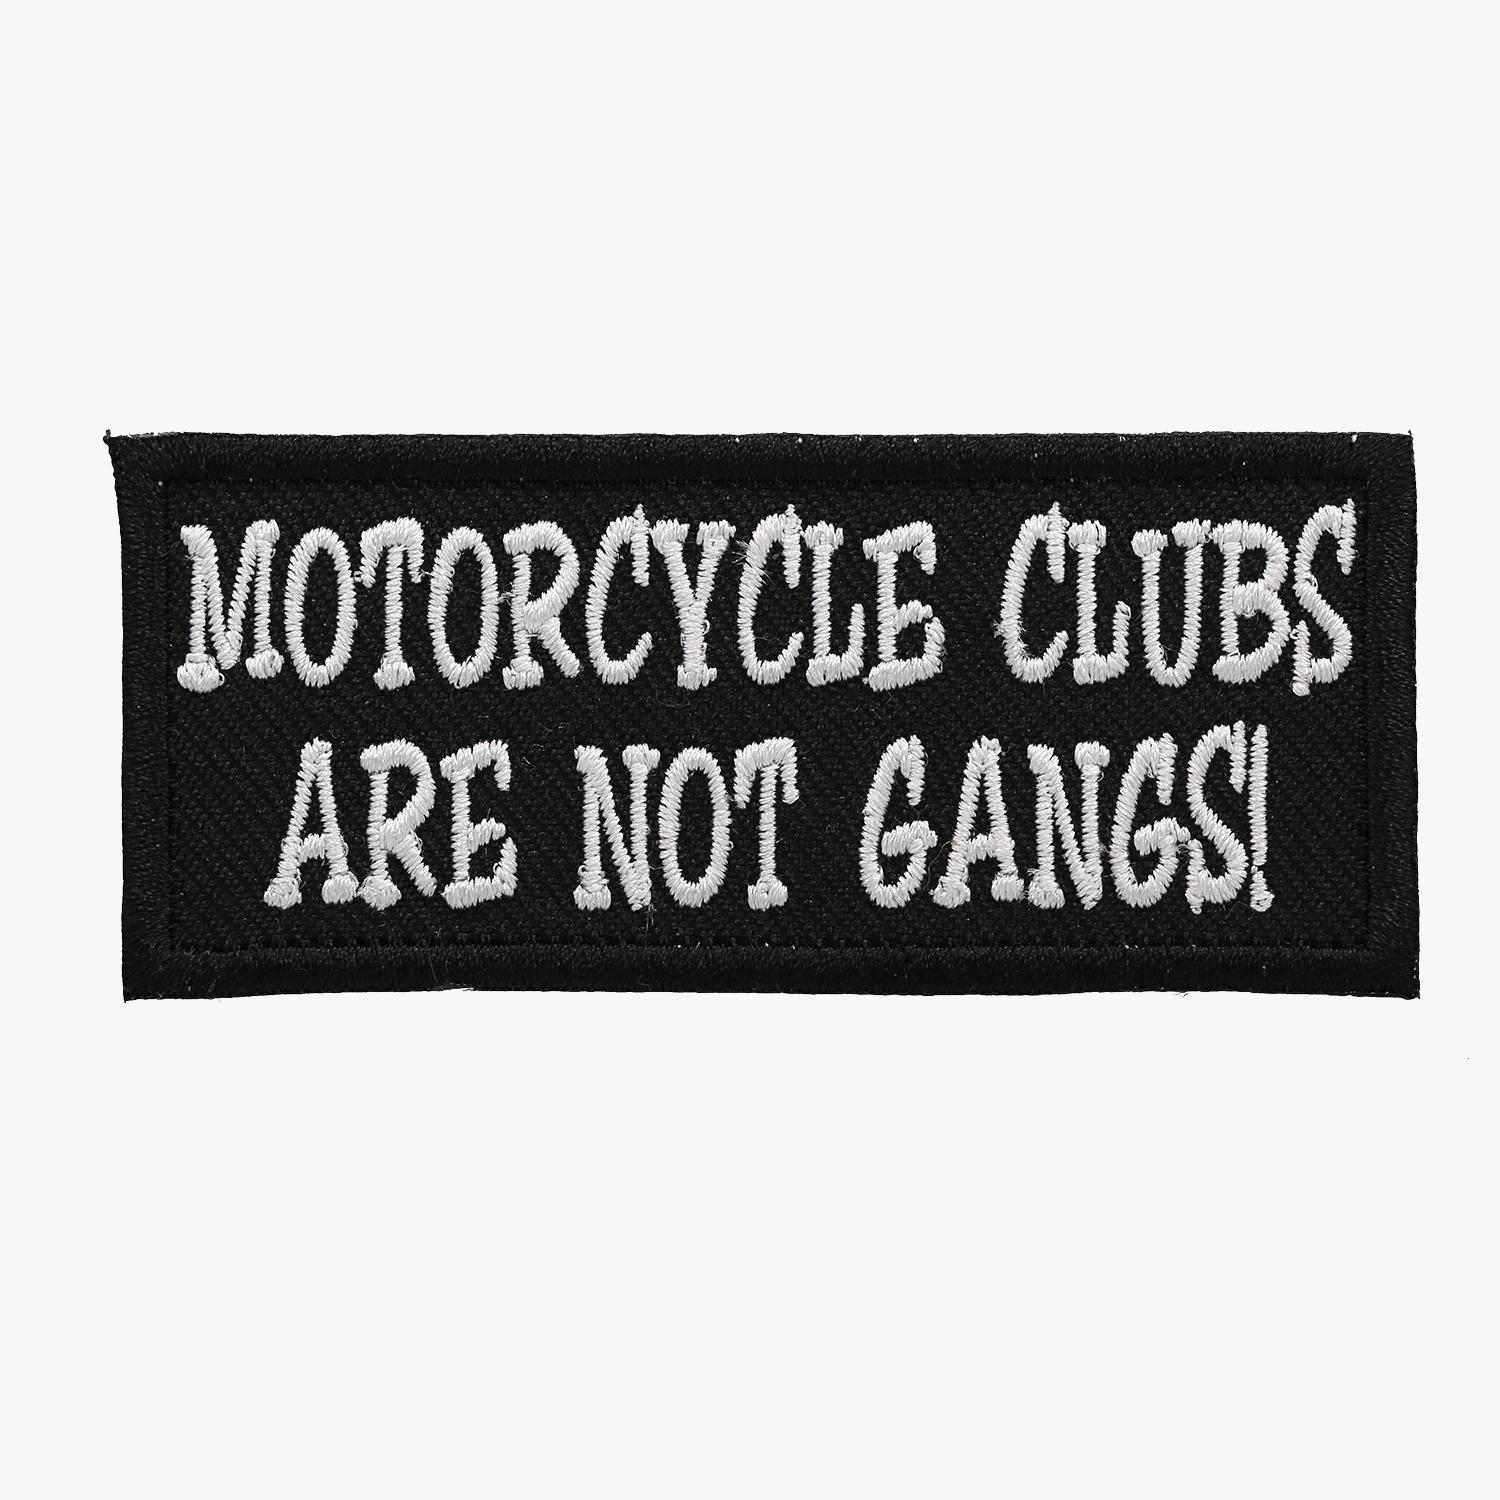 MOTORCYCLE CLUBS